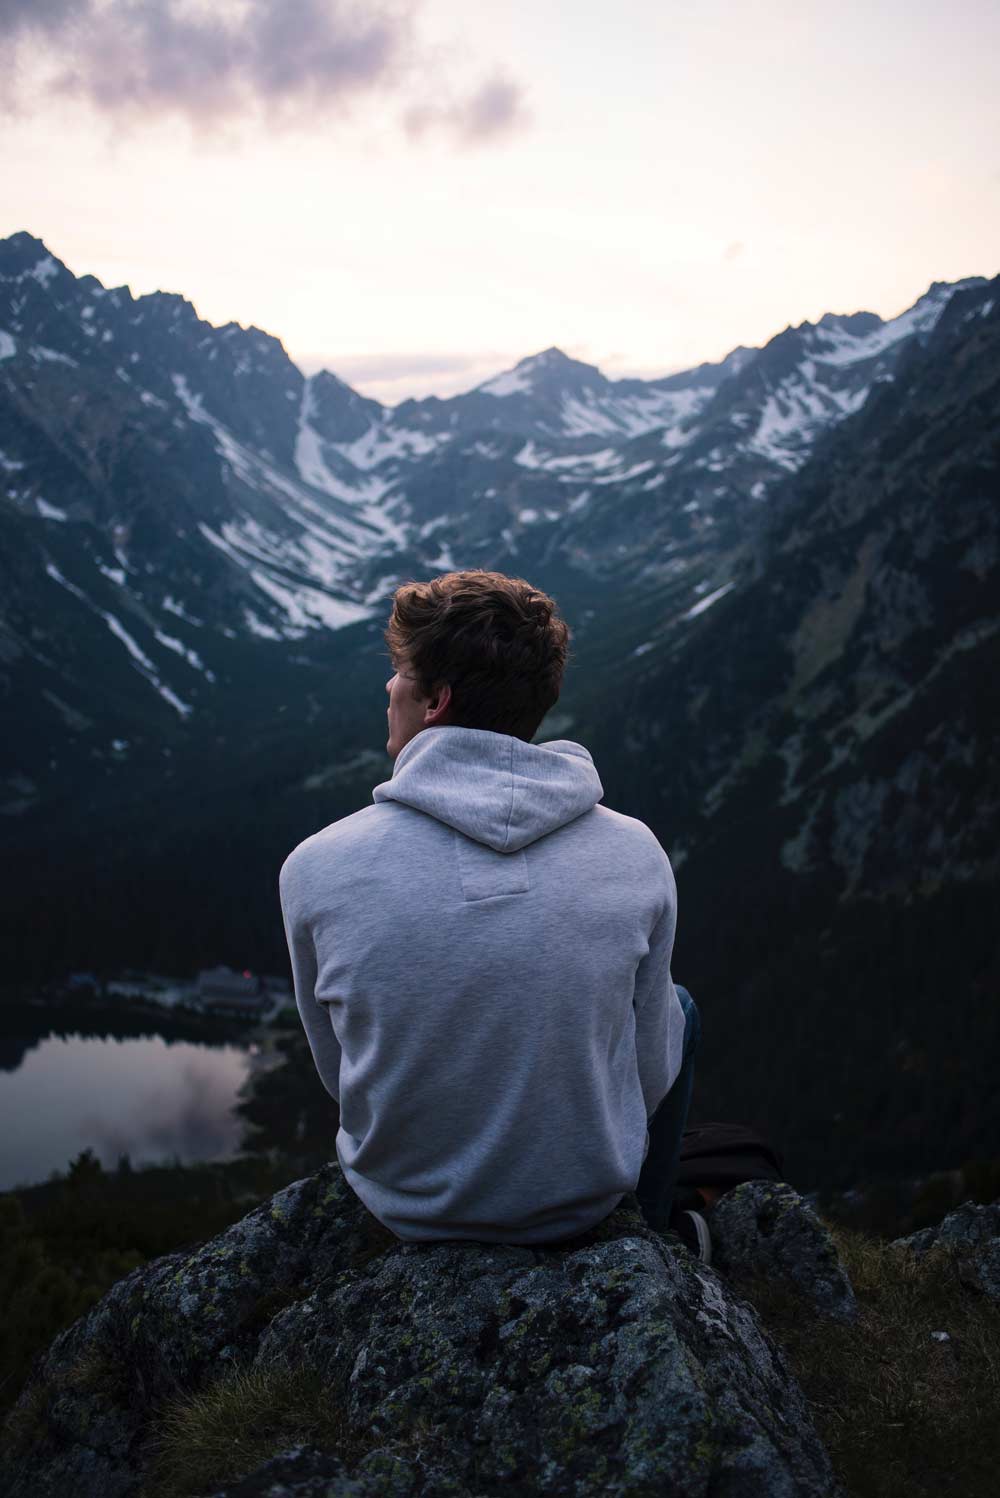 Young adult watching the beauty of the nature - mountains